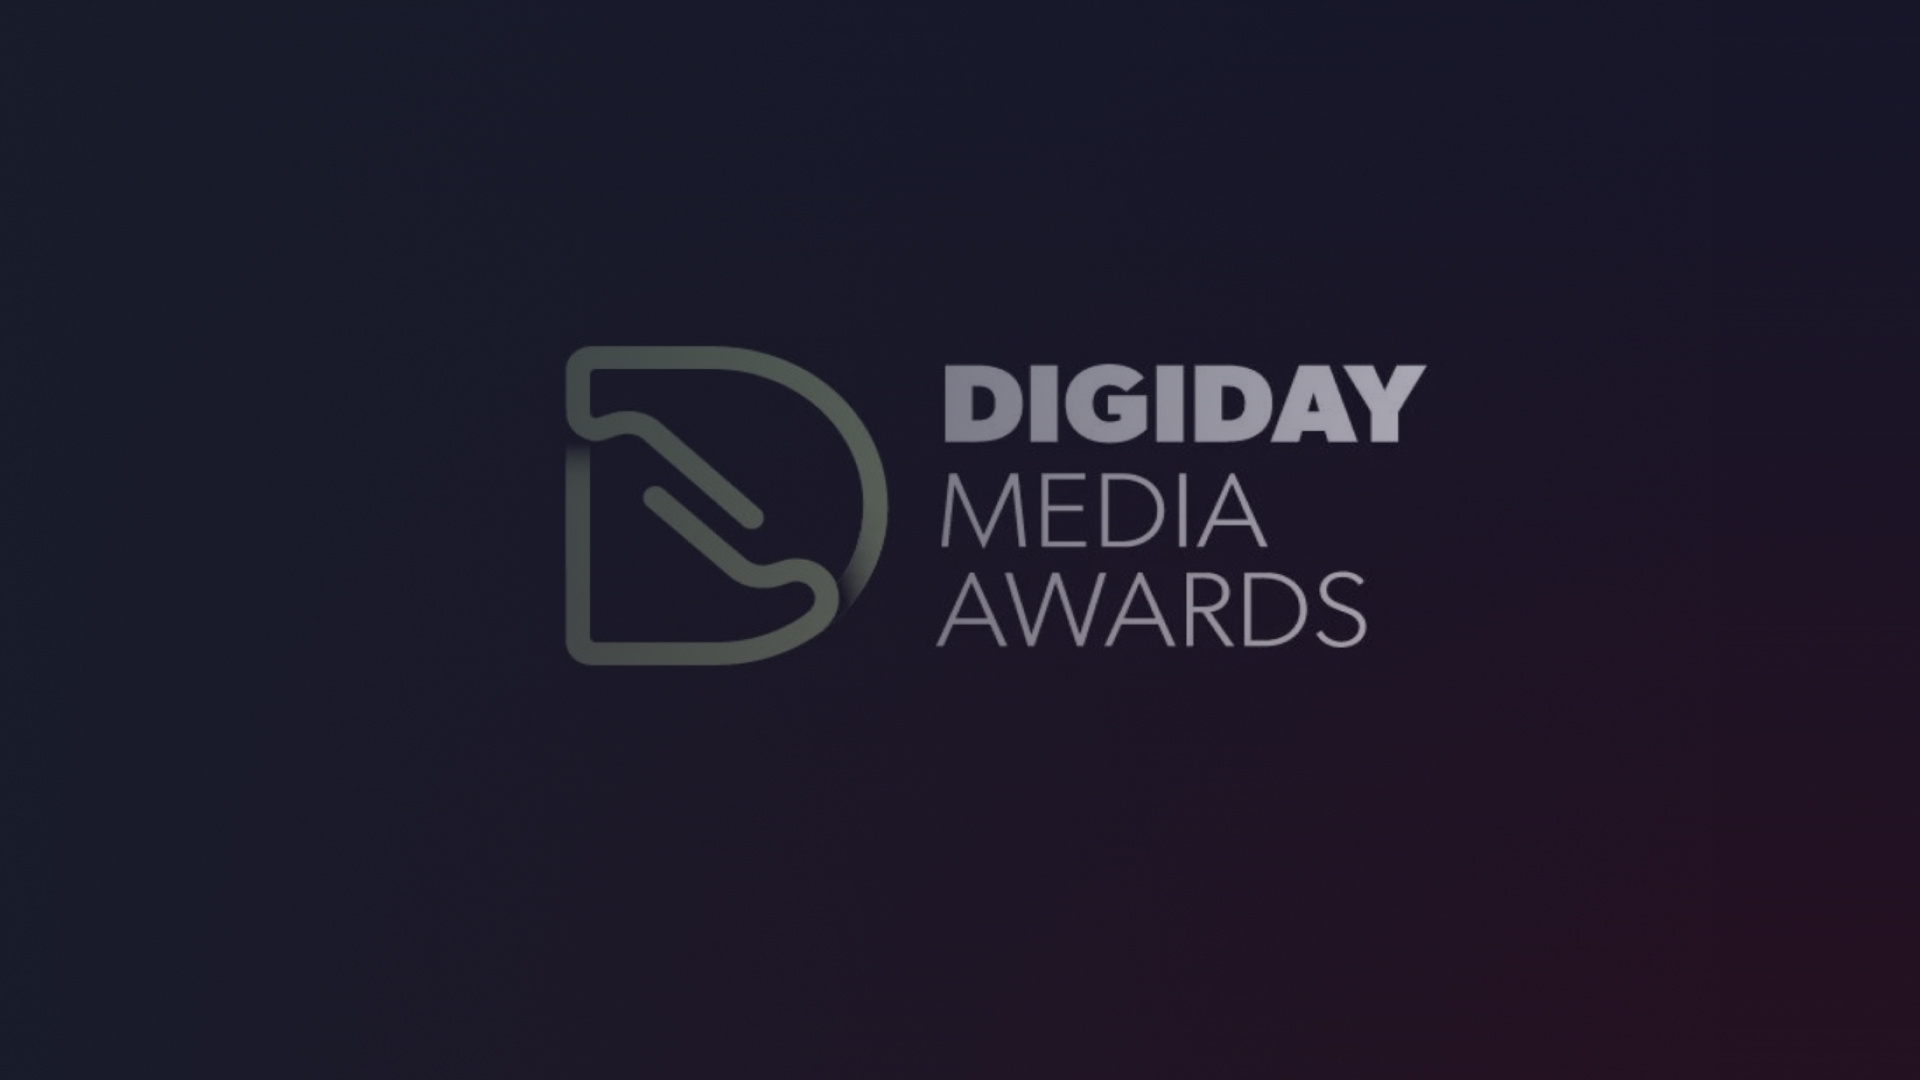 Seedtag Awarded “Best Contextual Targeting Offering” at Digiday Media Awards